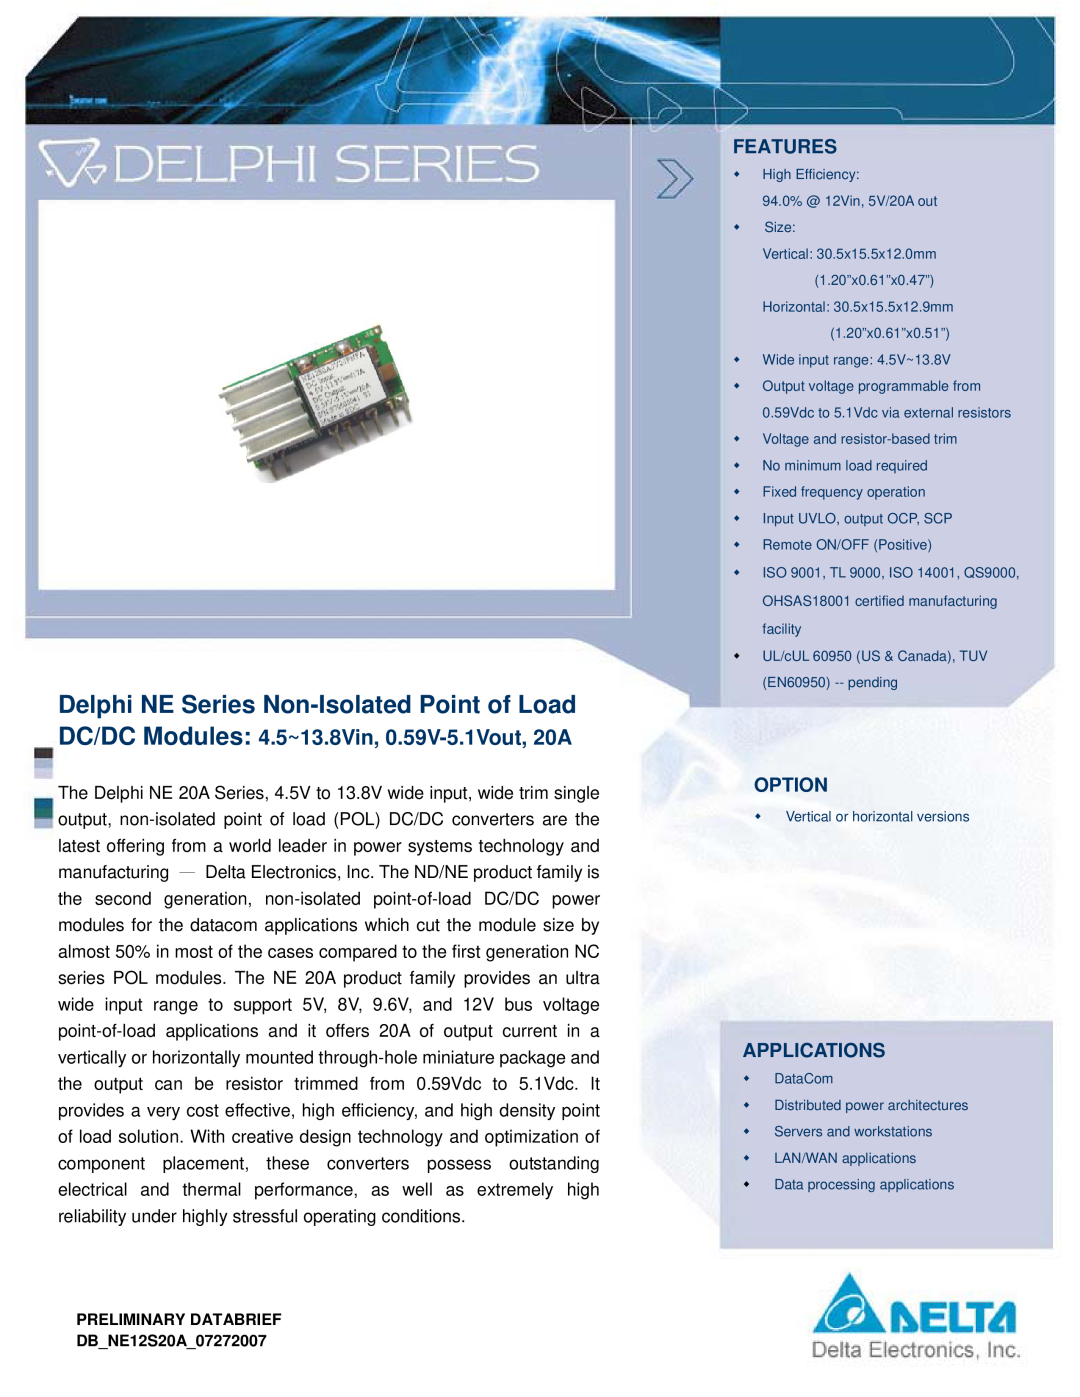 Delta Electronics NE Series manual Features, Option, Applications, PRELIMINARY DATABRIEF DBNE12S20A07272007 